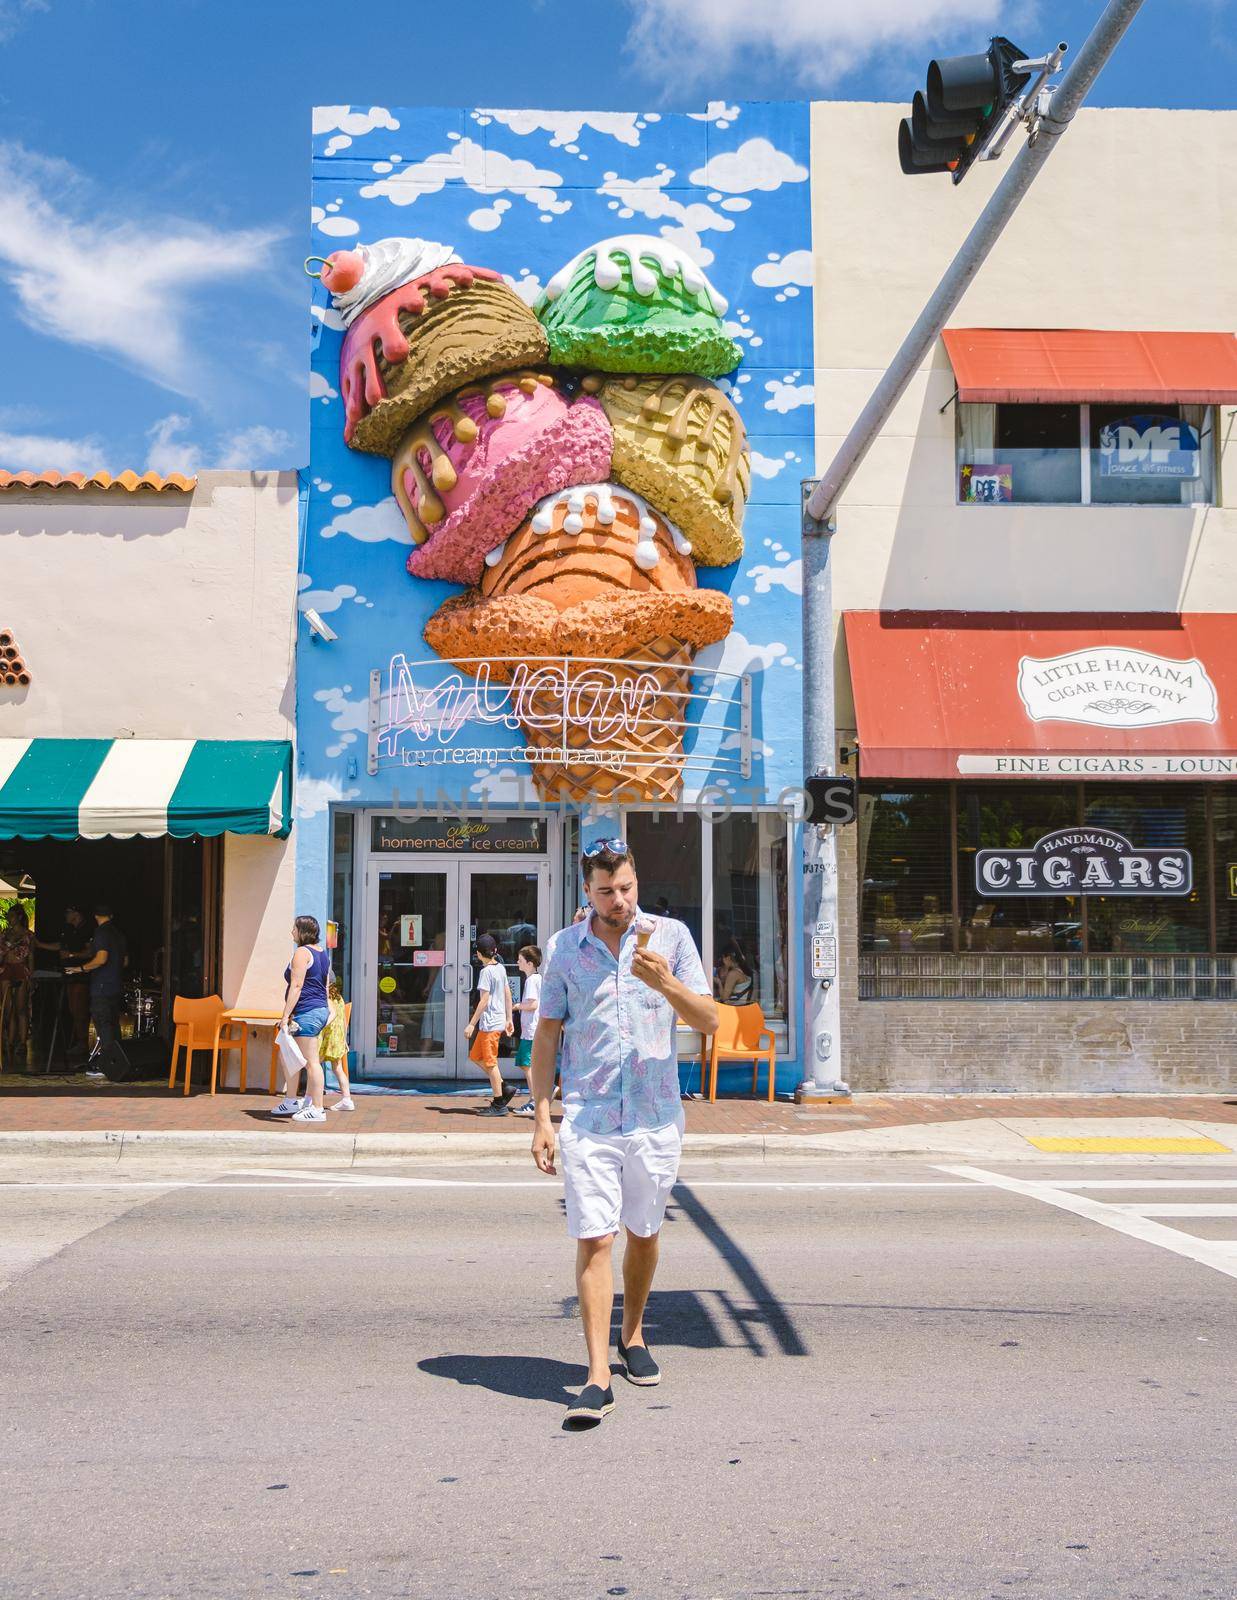 Little Havana Miami Florida April 2019, colorful Streets of Little Havana in Miami with art on the walls. men having a ice cream during summer